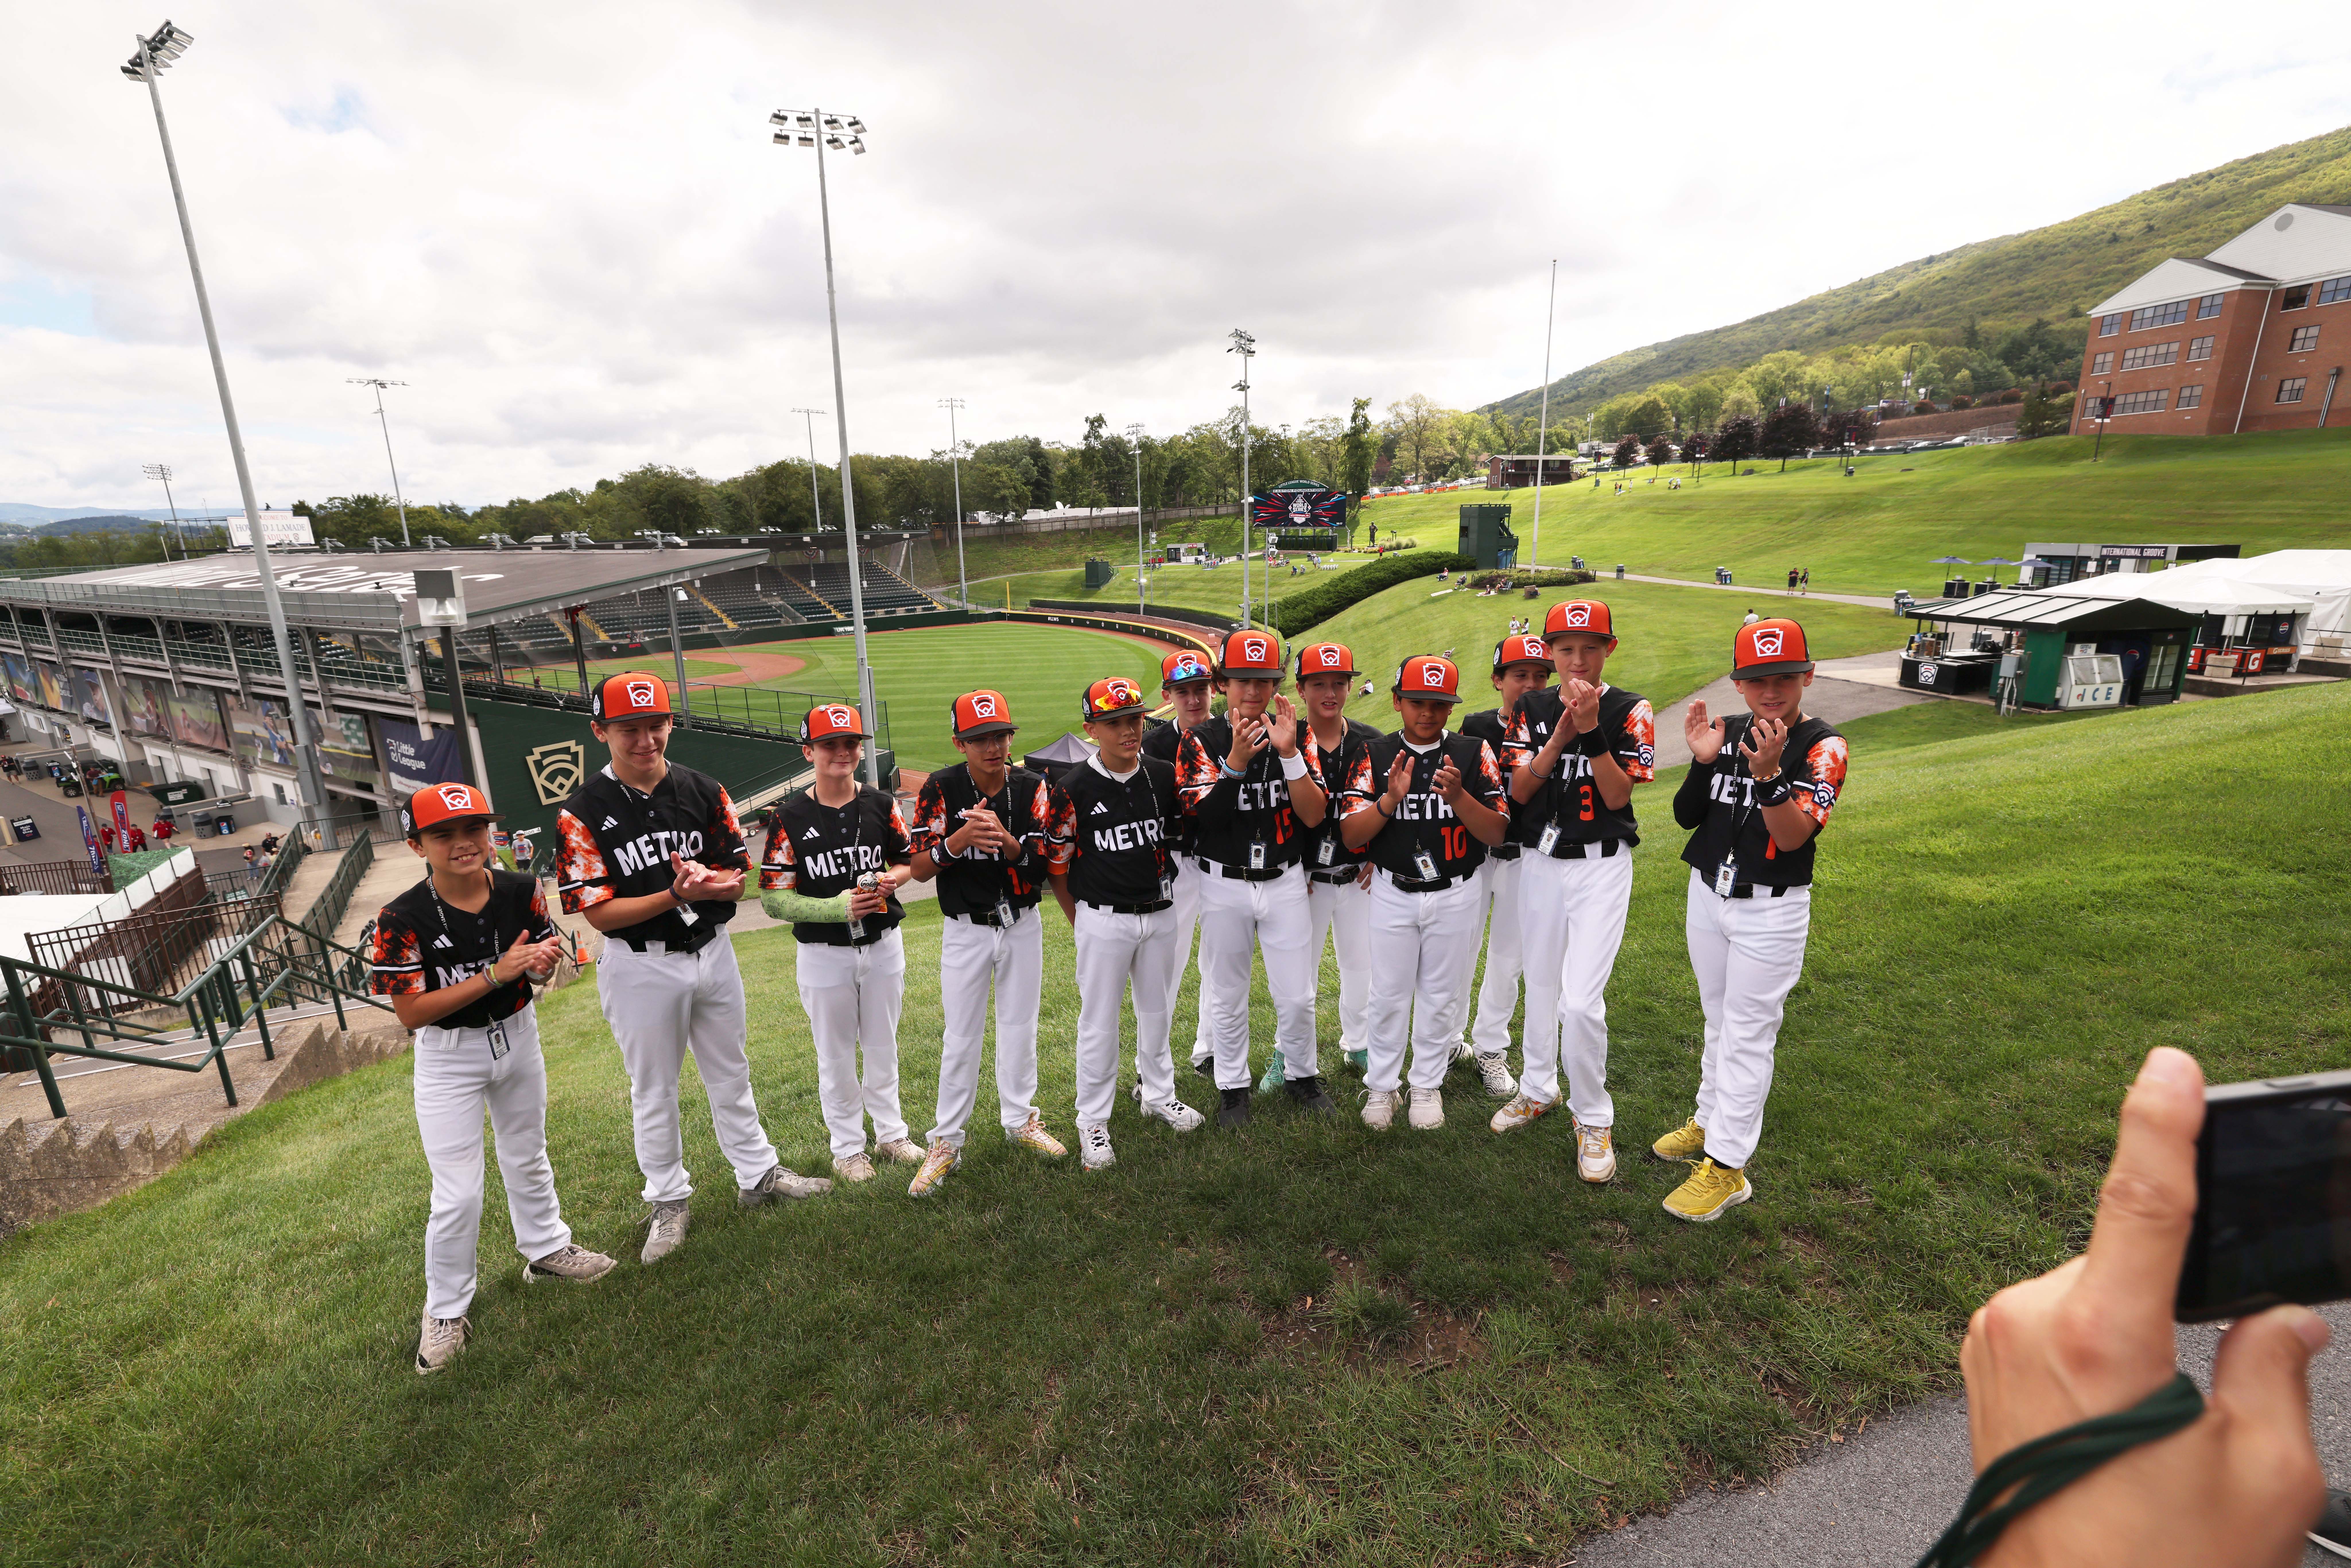 Little League - Southwest takes the W over Northwest #LLWS, #GirlsWithGame